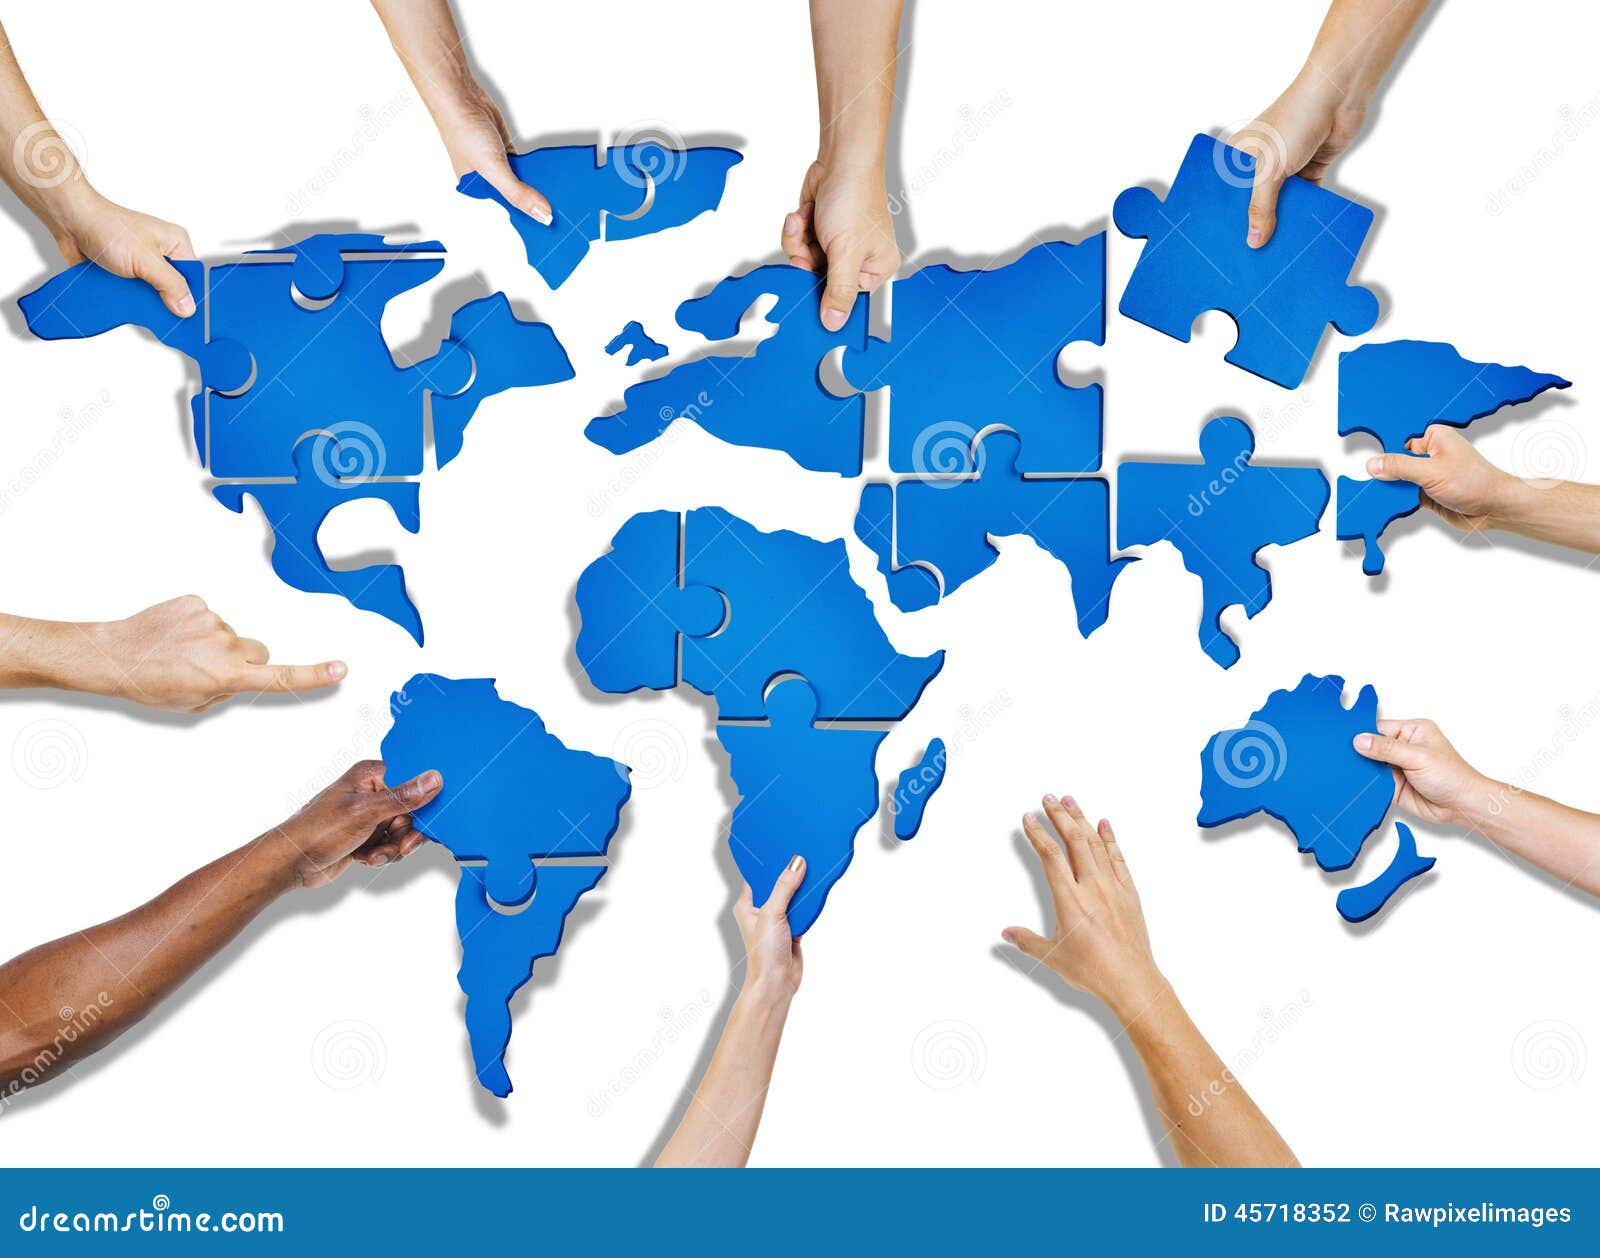 group of hands holding jigsaw puzzle forming world